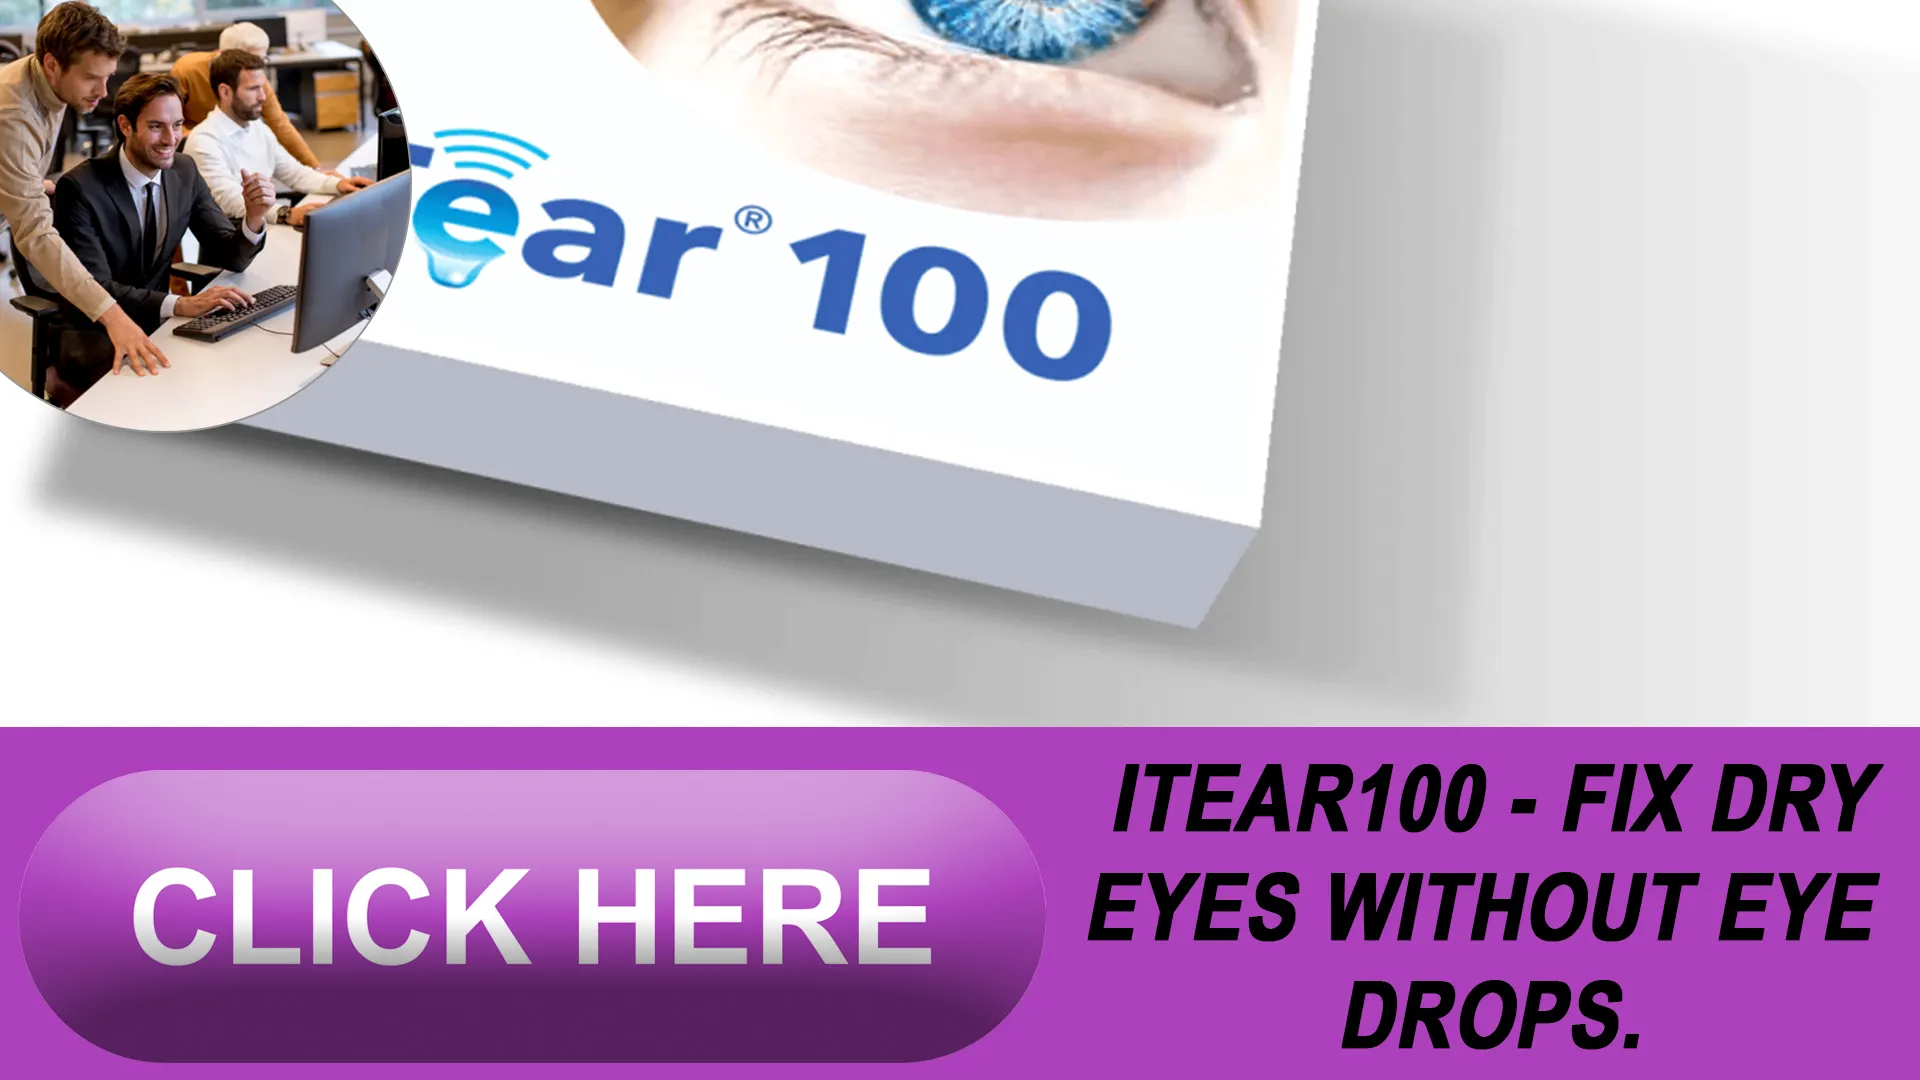 How iTEAR100 Stands Out from Prescription Drugs